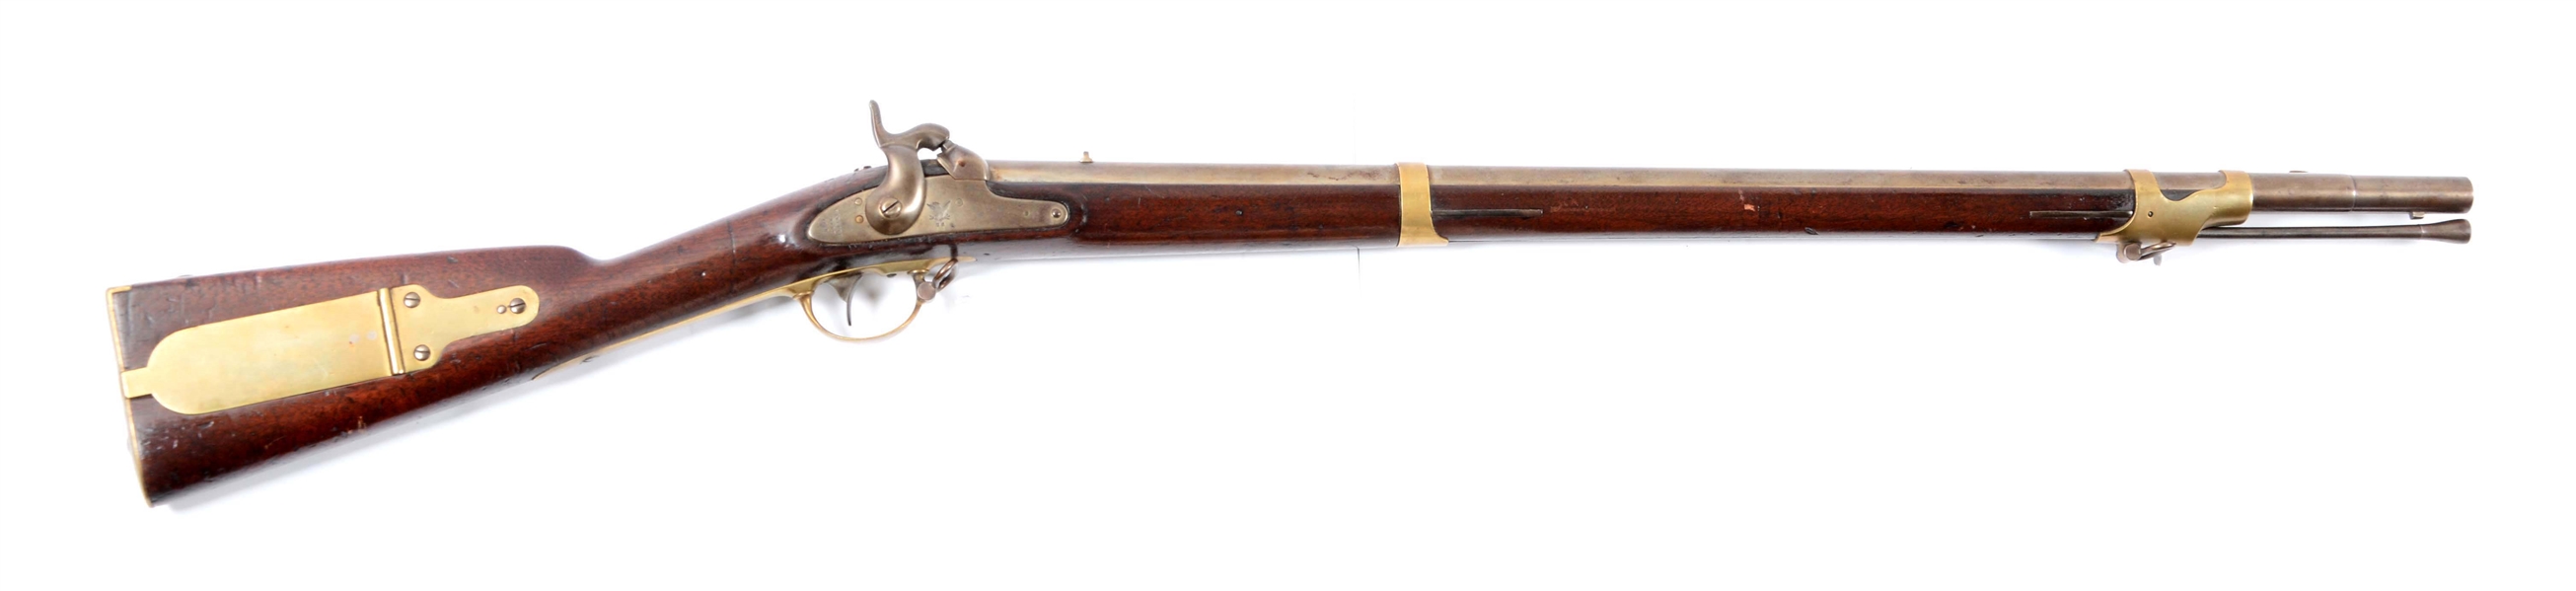 (A) U.S. MODEL 1841 "MISSISSIPPI" PERCUSSION RIFLE BY HARPERS FERRY.